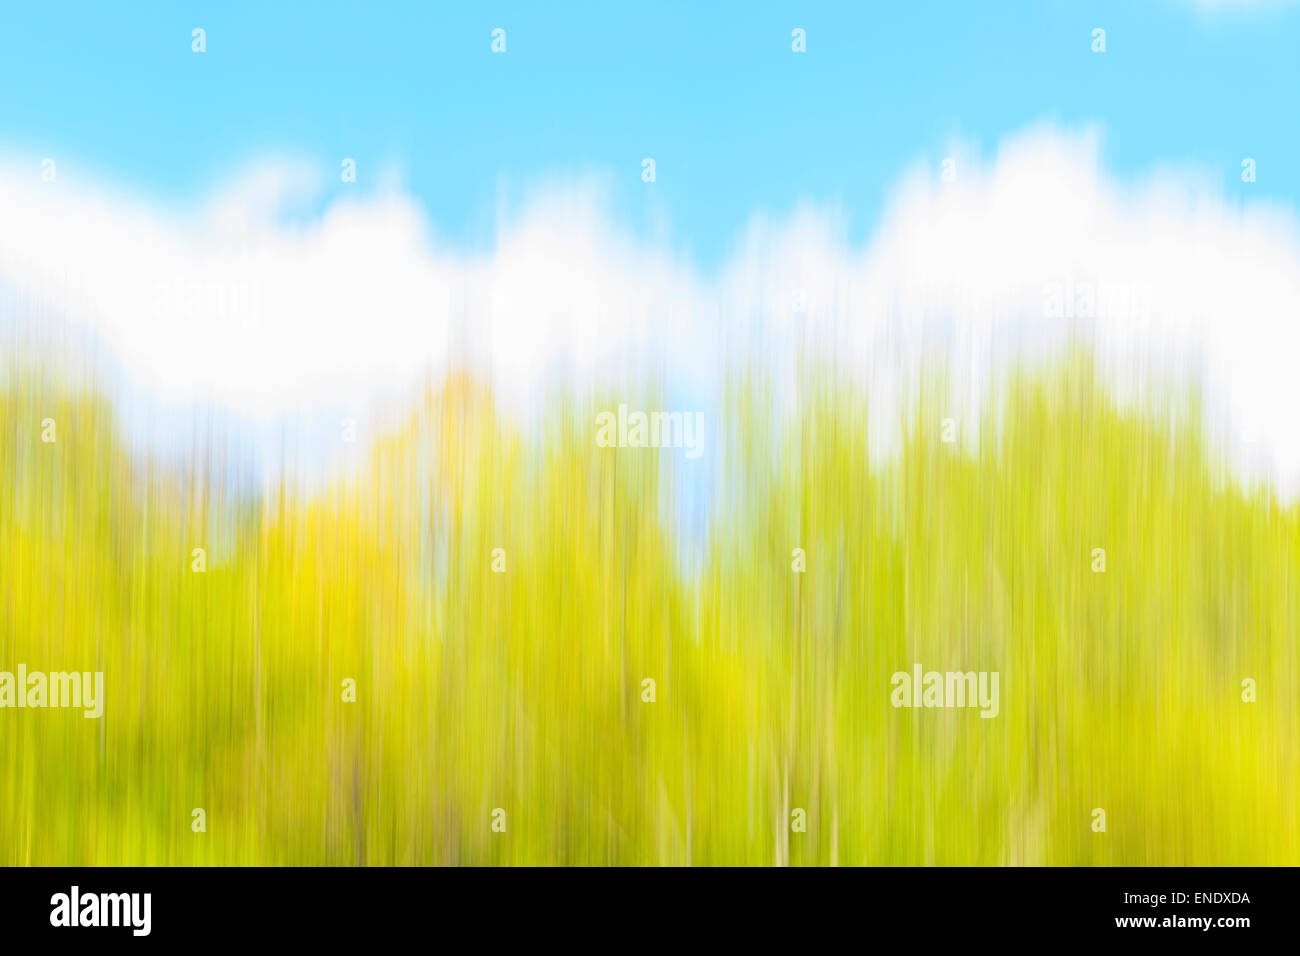 Abstract motion blurred nature background with blue sky, clouds and trees. Stock Photo